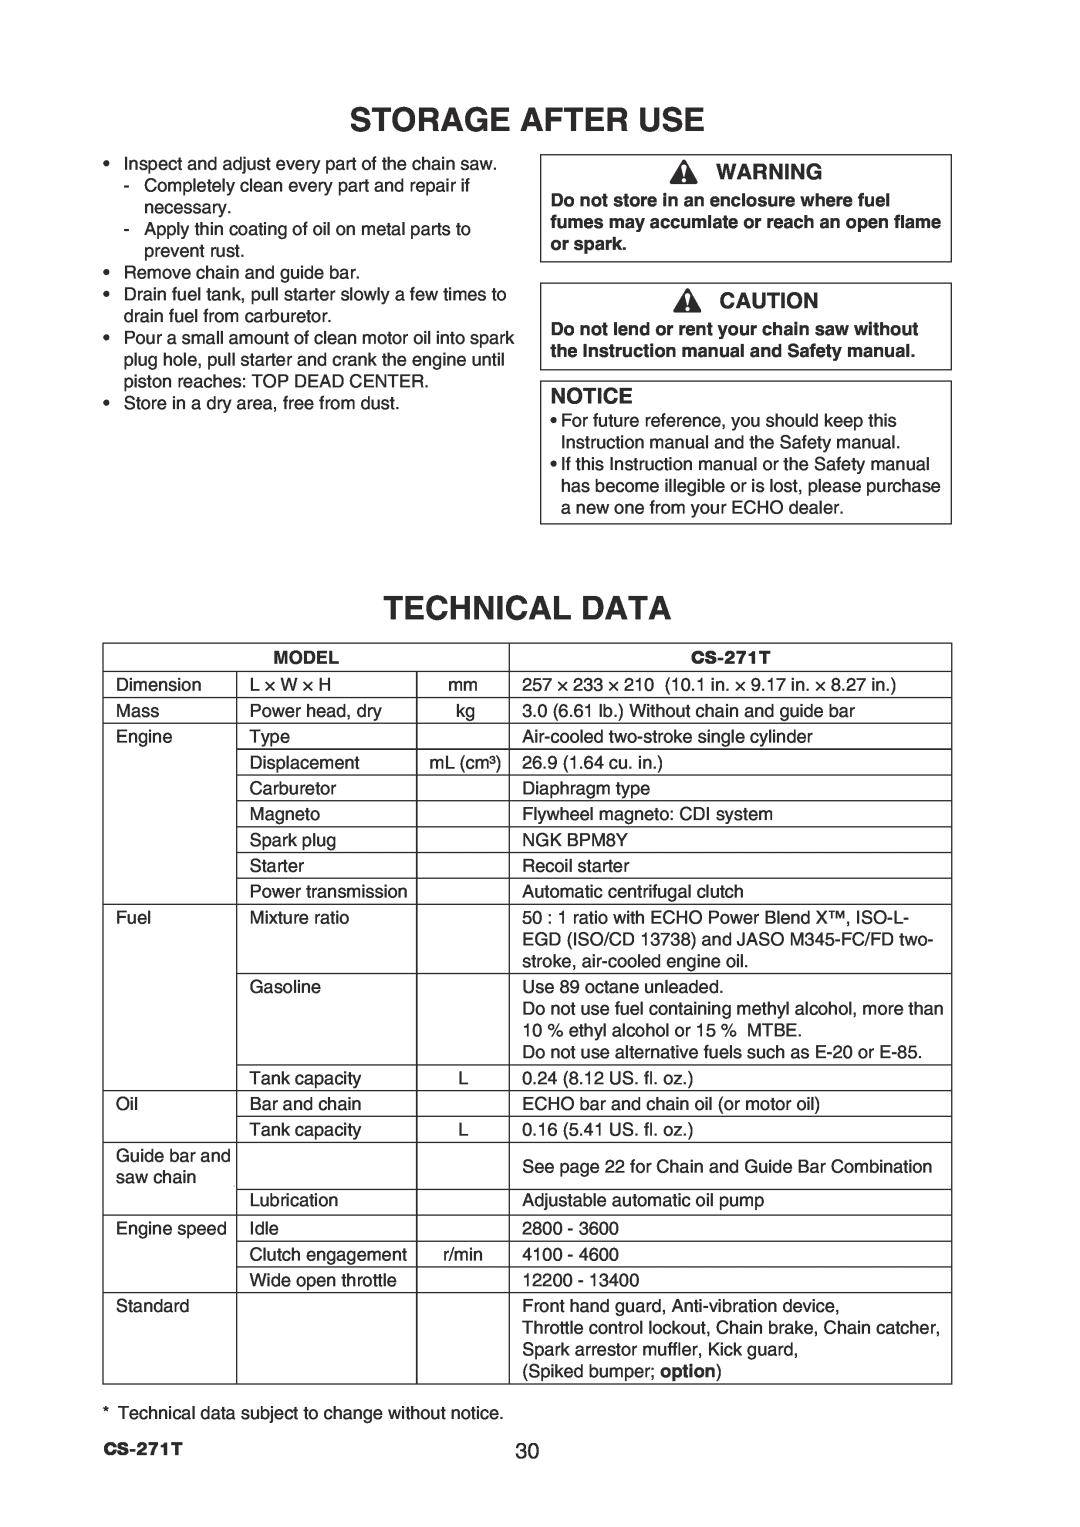 Echo CS-271T instruction manual Storage After Use, Technical Data 